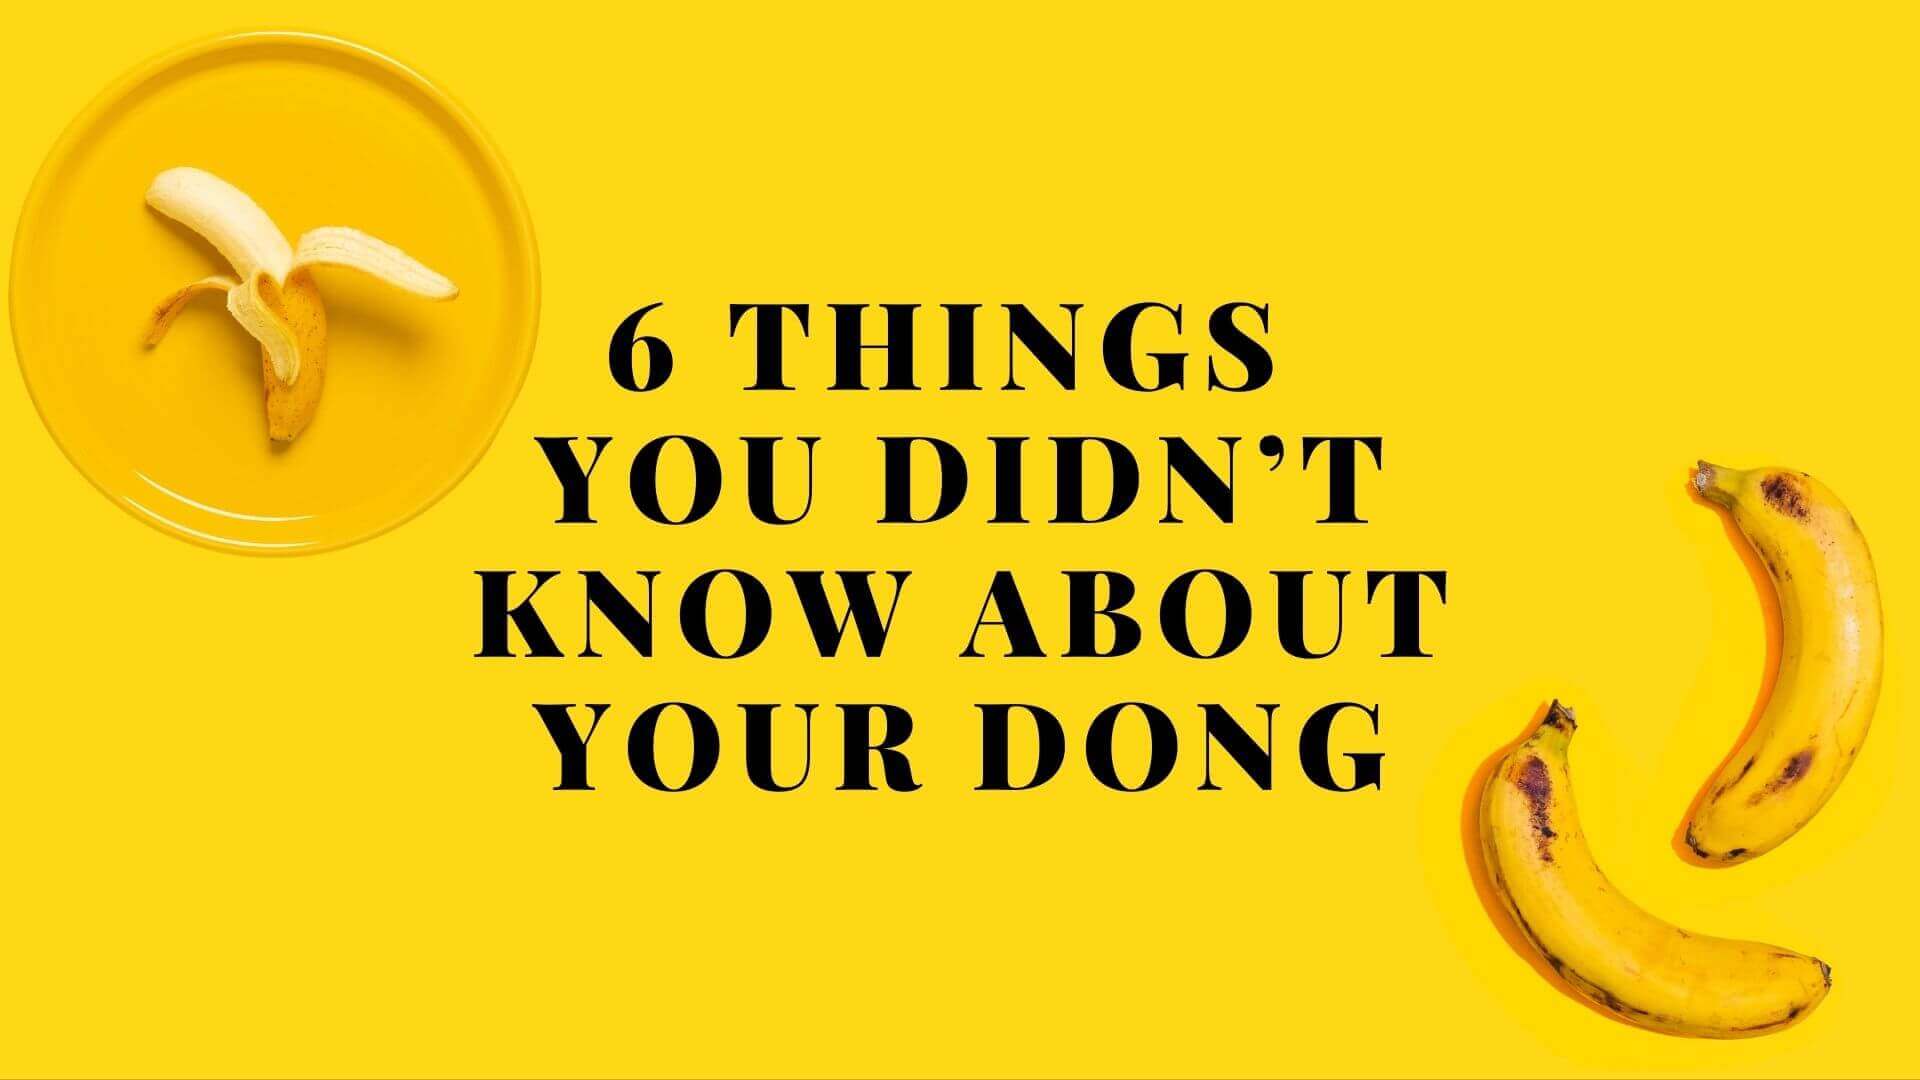 6 things you didn’t know about your dong